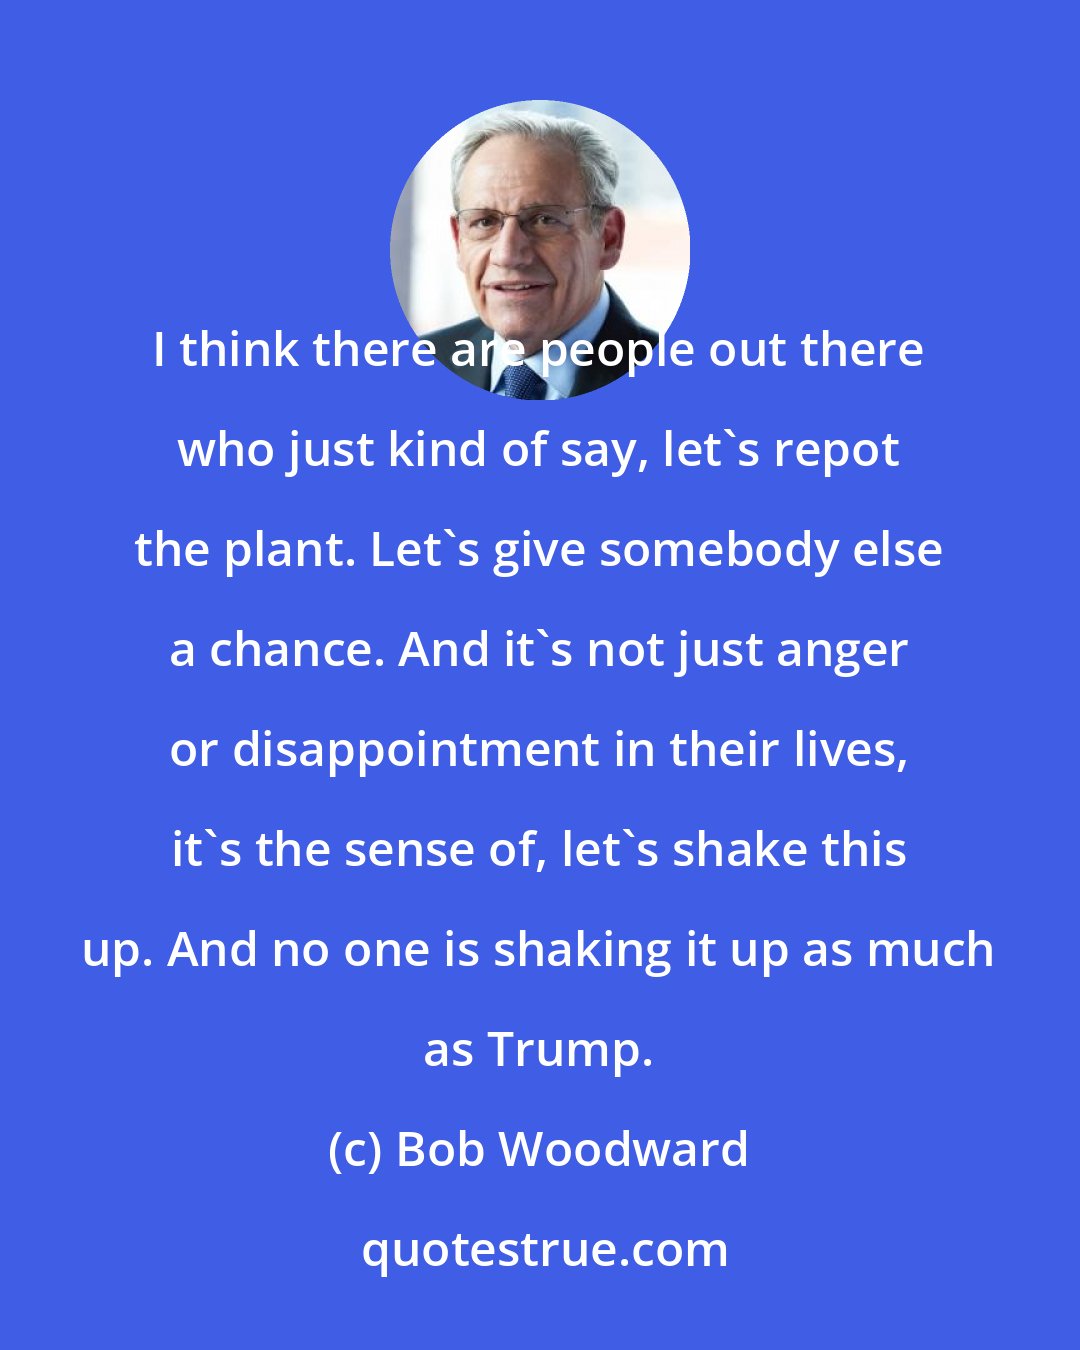 Bob Woodward: I think there are people out there who just kind of say, let's repot the plant. Let's give somebody else a chance. And it's not just anger or disappointment in their lives, it's the sense of, let's shake this up. And no one is shaking it up as much as Trump.